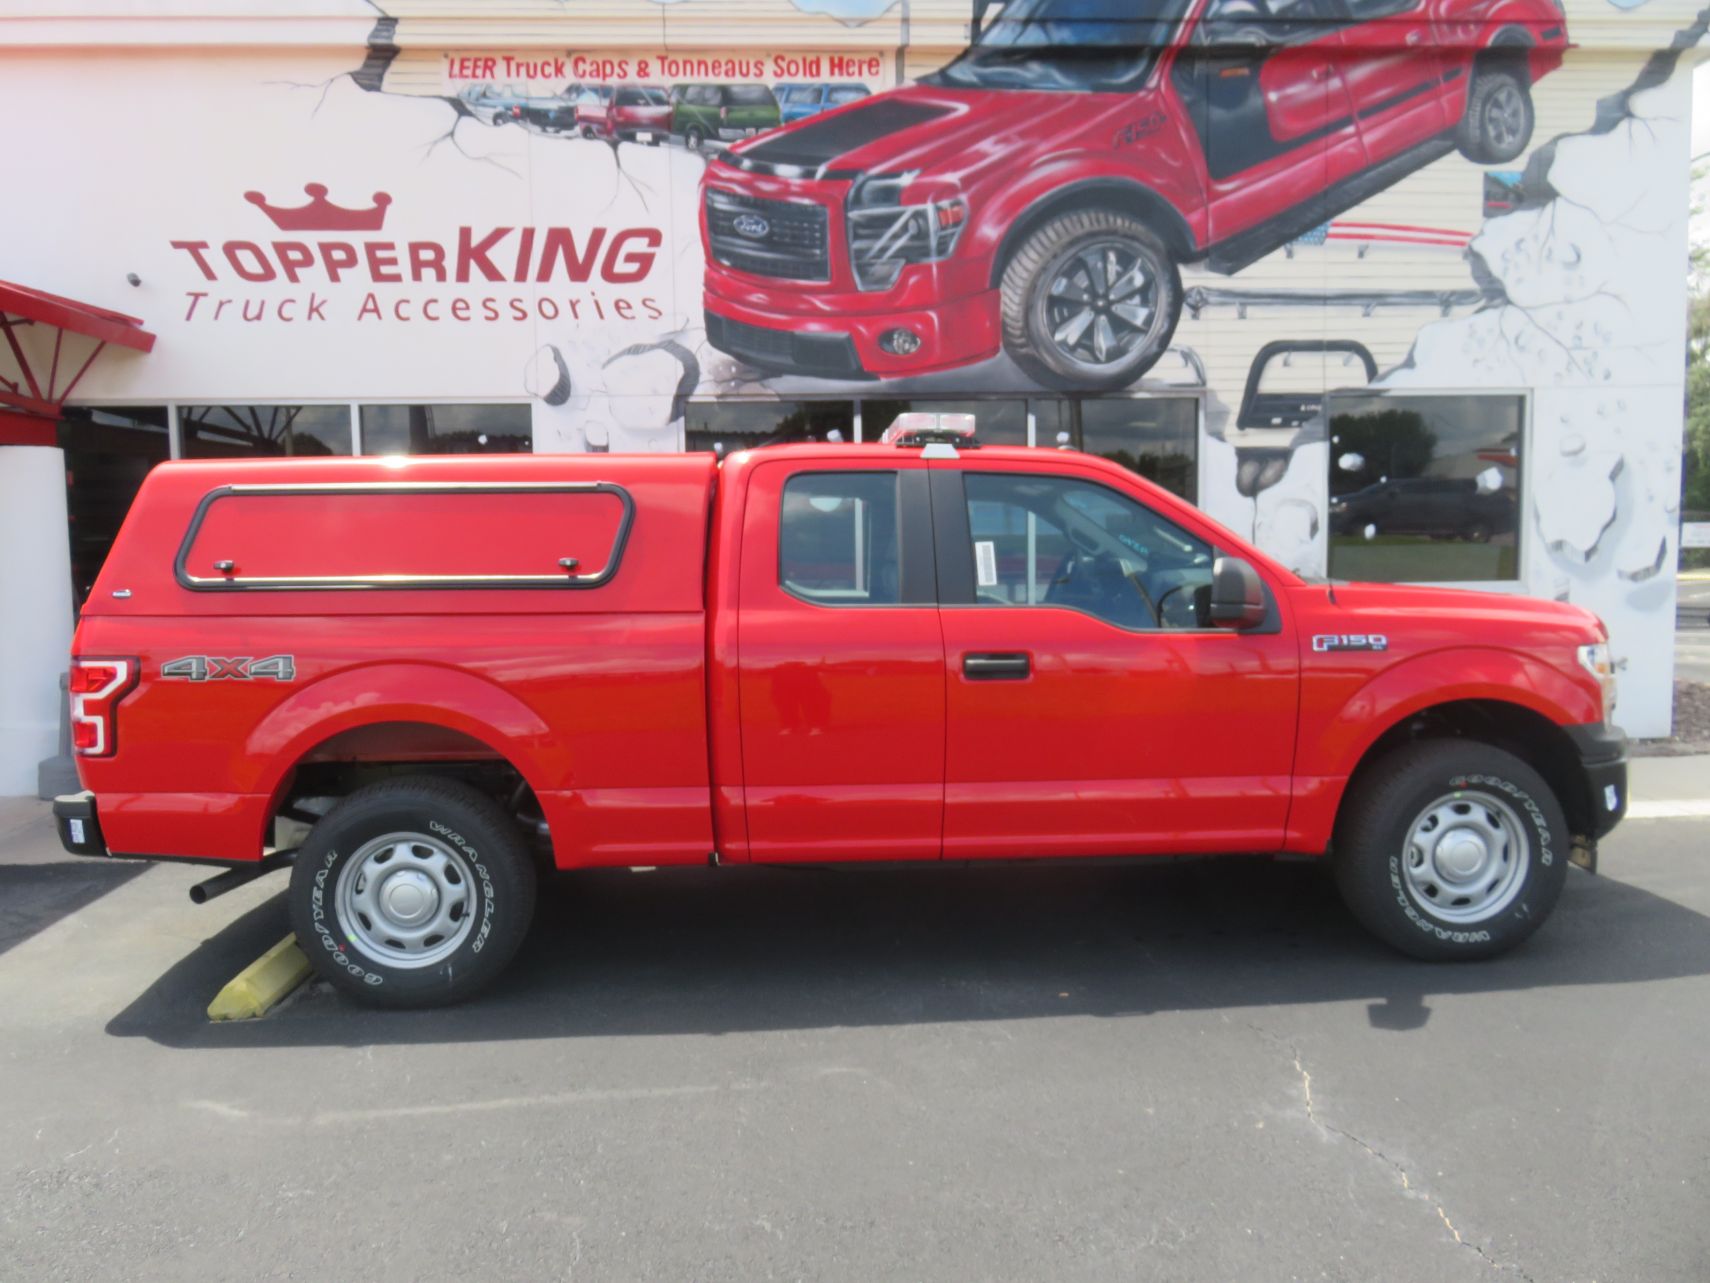 2019 Ford F150 with Ranch Echo, Solid Side Access Windoors, Hitch by TopperKING in Brandon, FL 813-689-2449 or Clearwater, FL 727-530-9066. Call today!